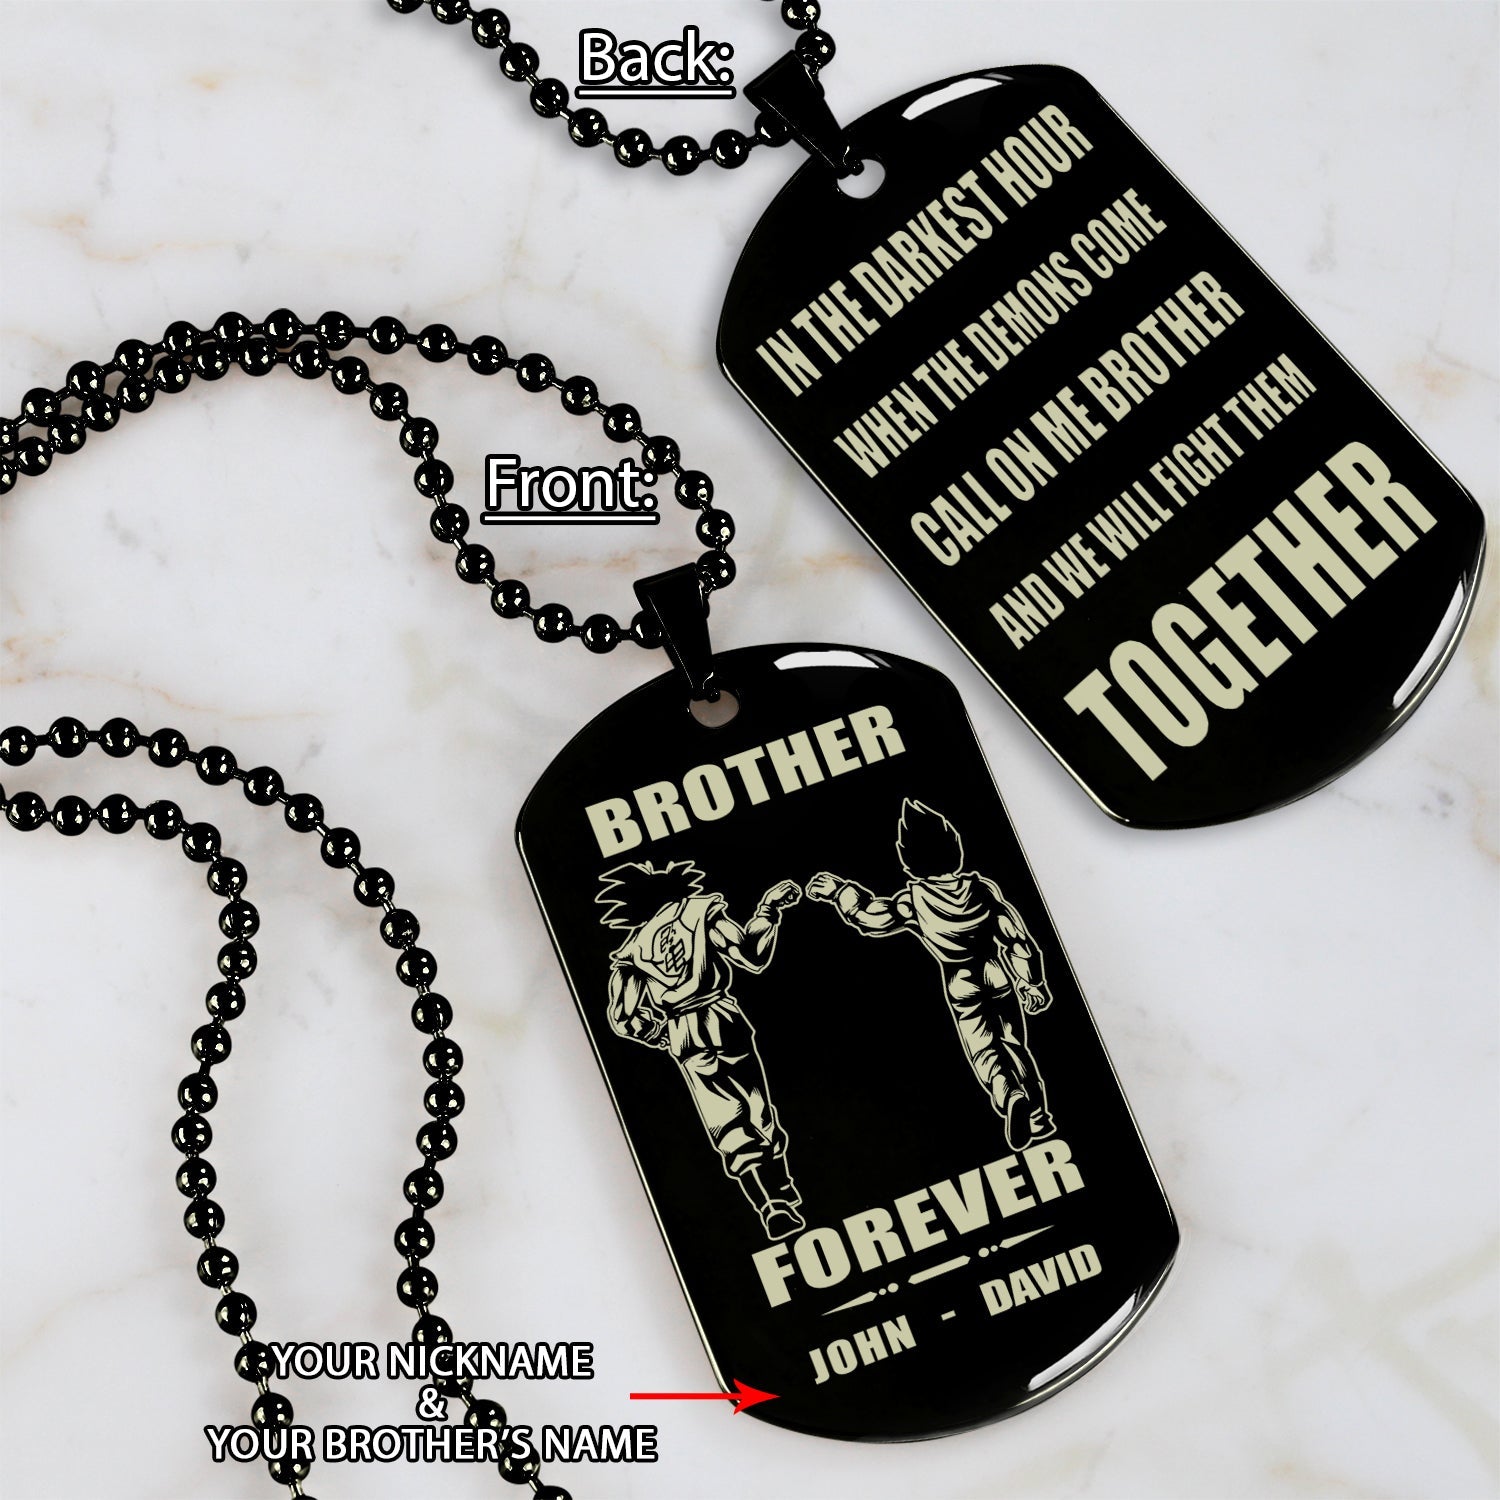 Customizable engraved black dog tag double sided gift from brother, In the darkest hour, When the demons come call on me brother and we will fight them together, brother forever